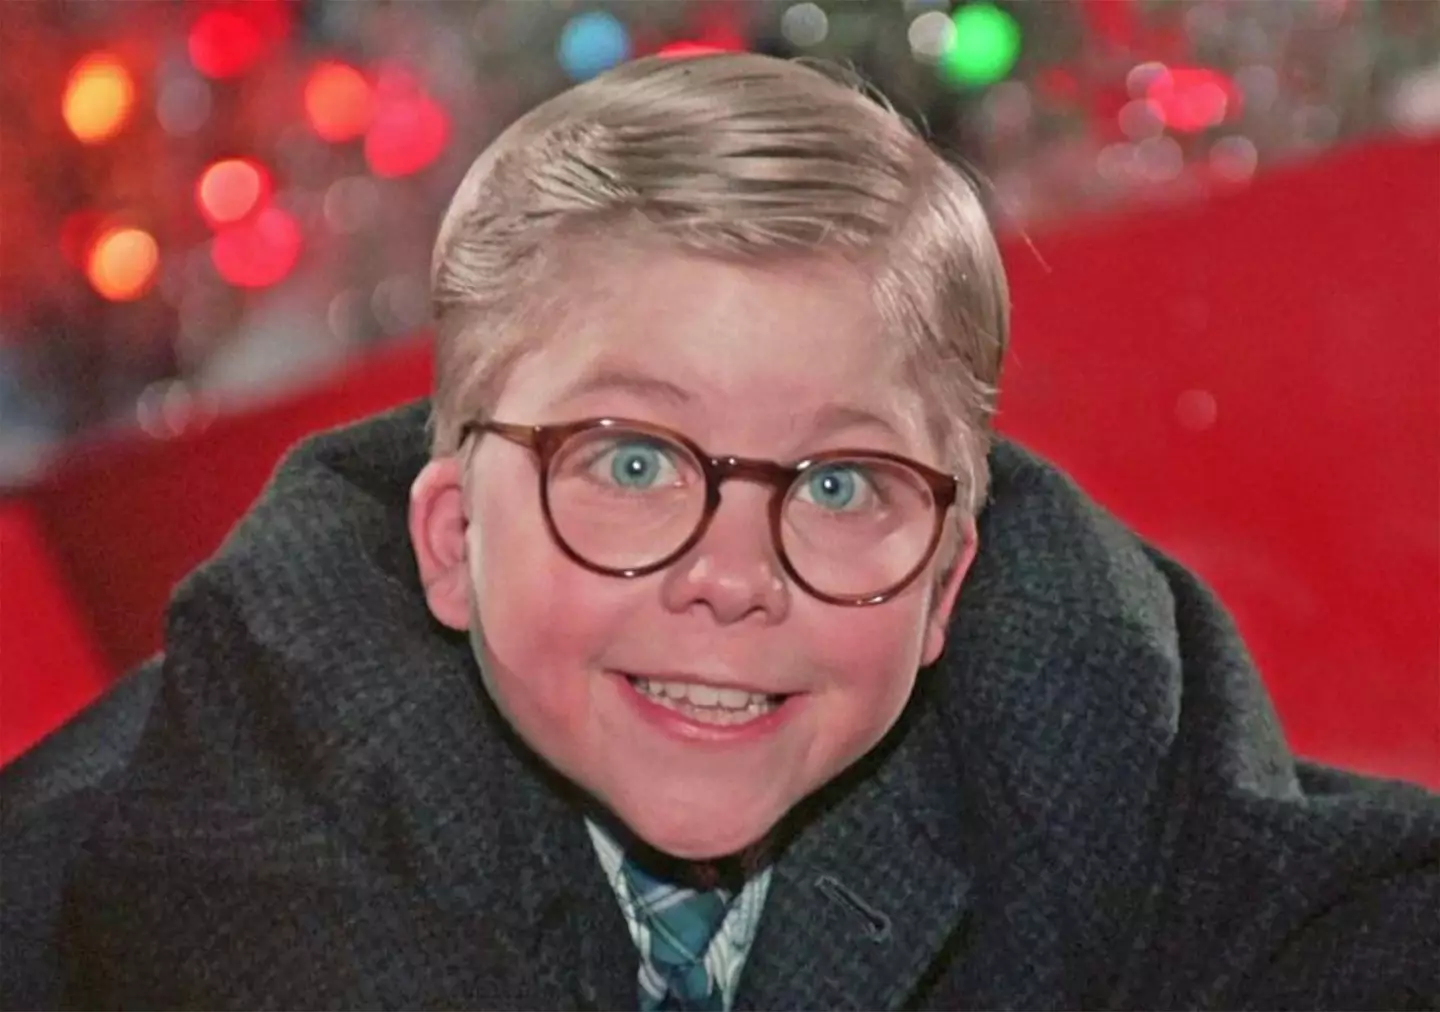 Peter Billingsley plays Ralphie in A Christmas Story.